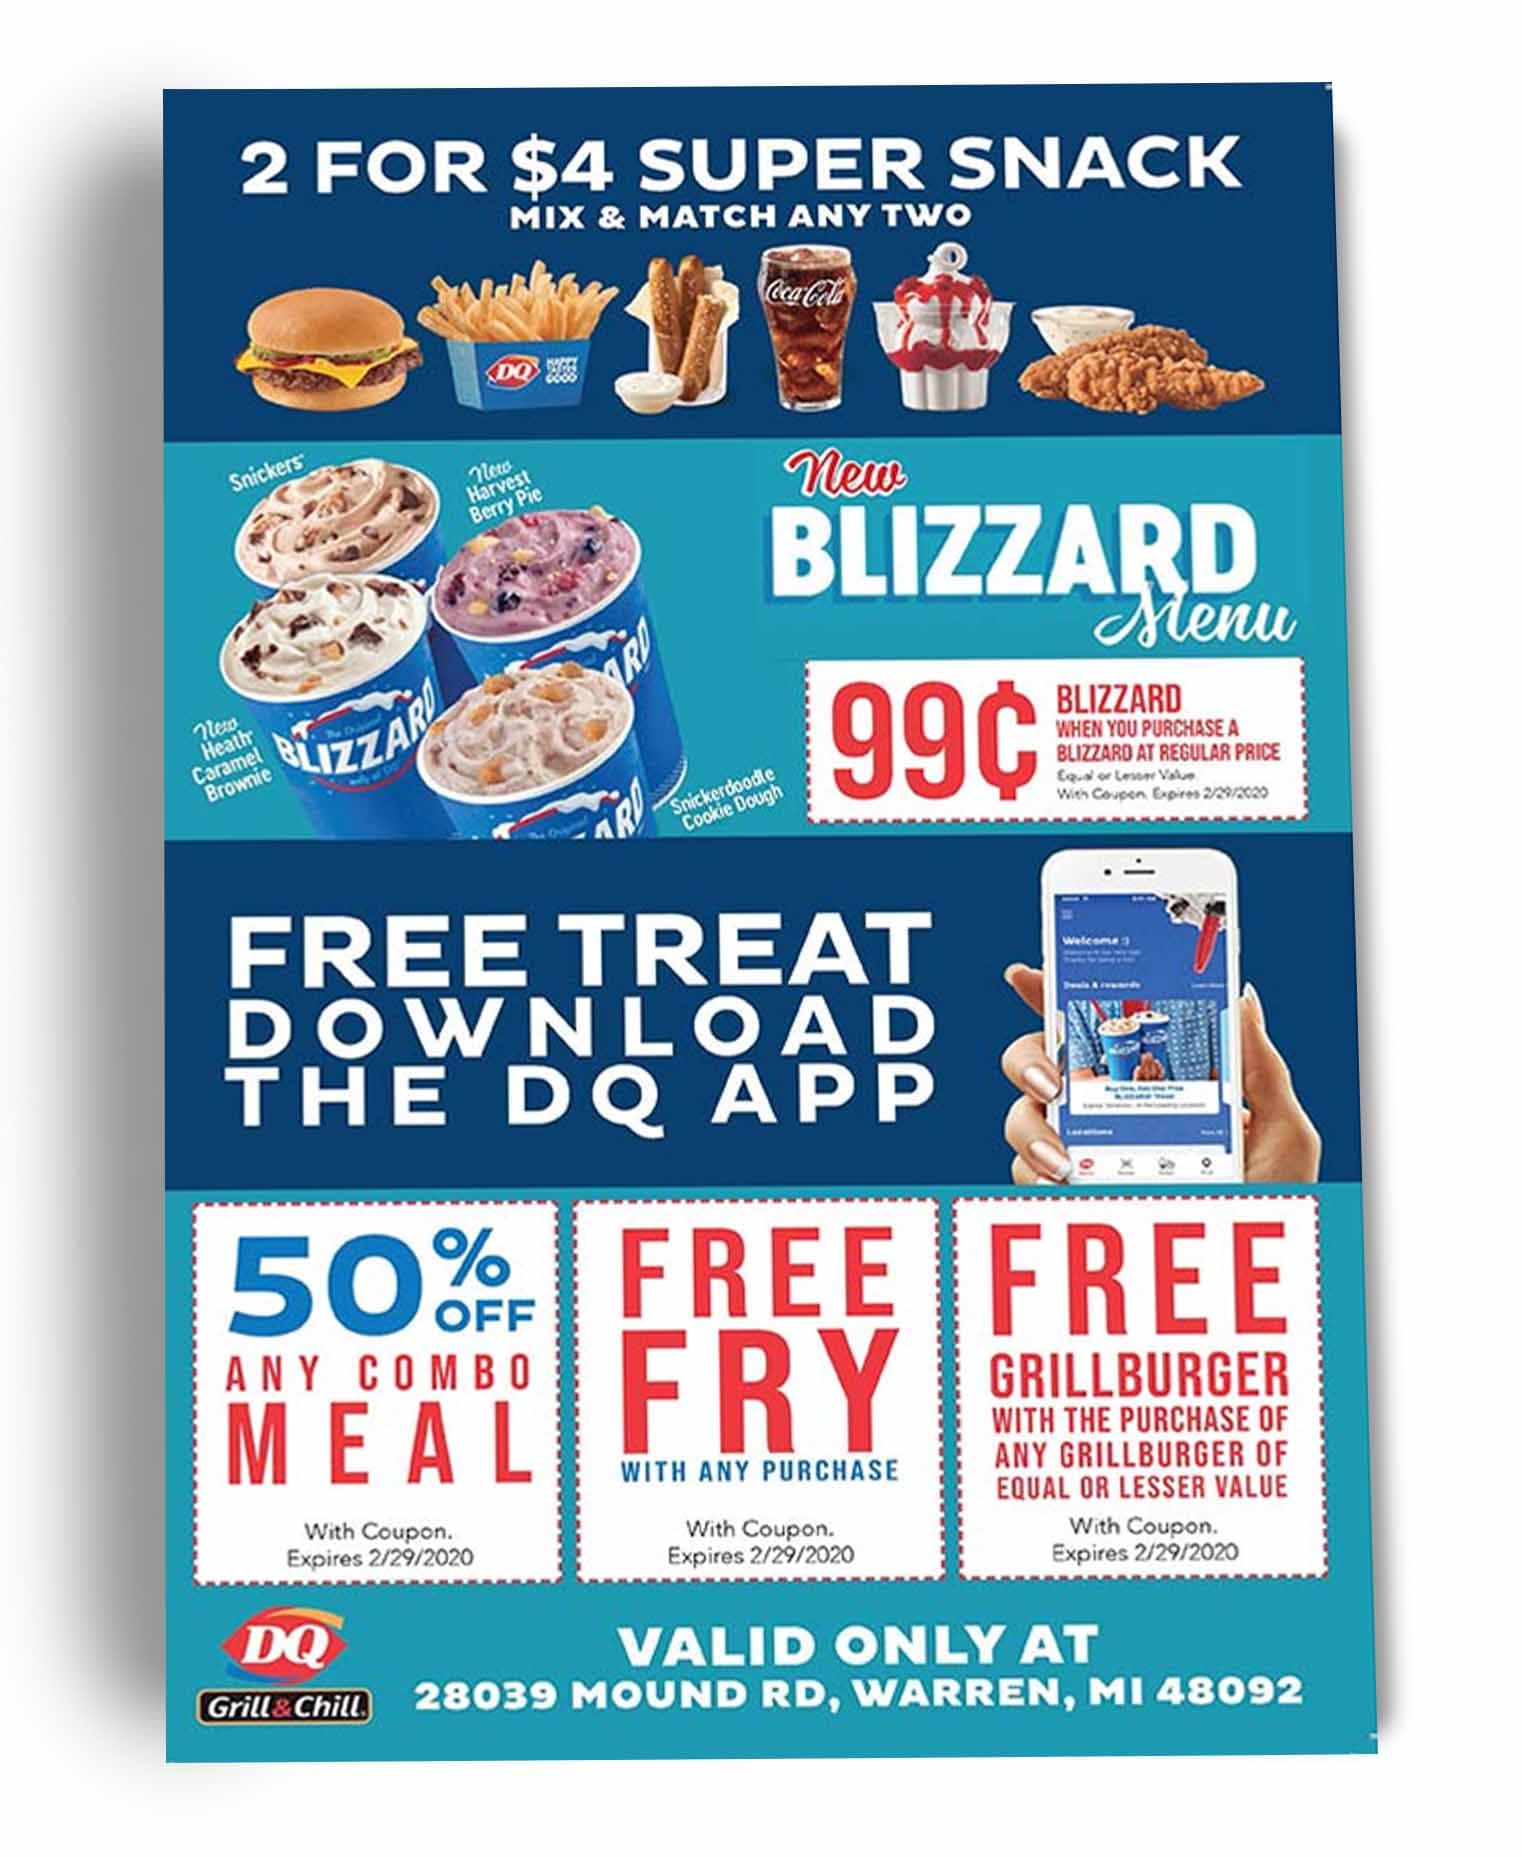 burgers-fries-snacks-blizzard-advertising-poster